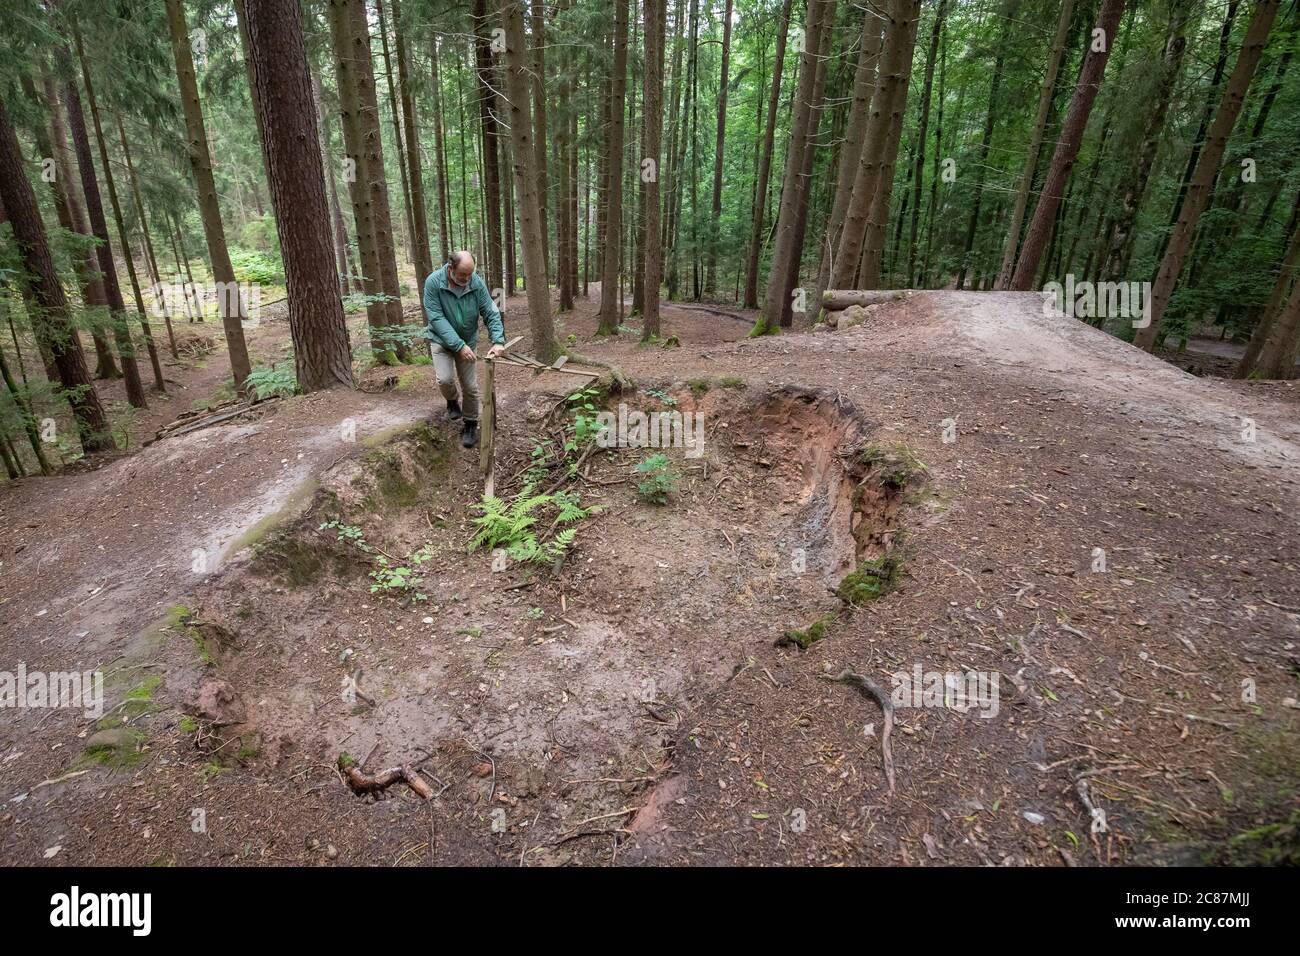 Rektangel at opfinde utilsigtet 17 July 2020, Bavaria, Nuremberg: Hans-Joachim Ulrich, a forester at the  Bavarian State Forestry, is looking at a jumping course in Nuremberg's  Reichswald that was built by mountain bikers themselves and is